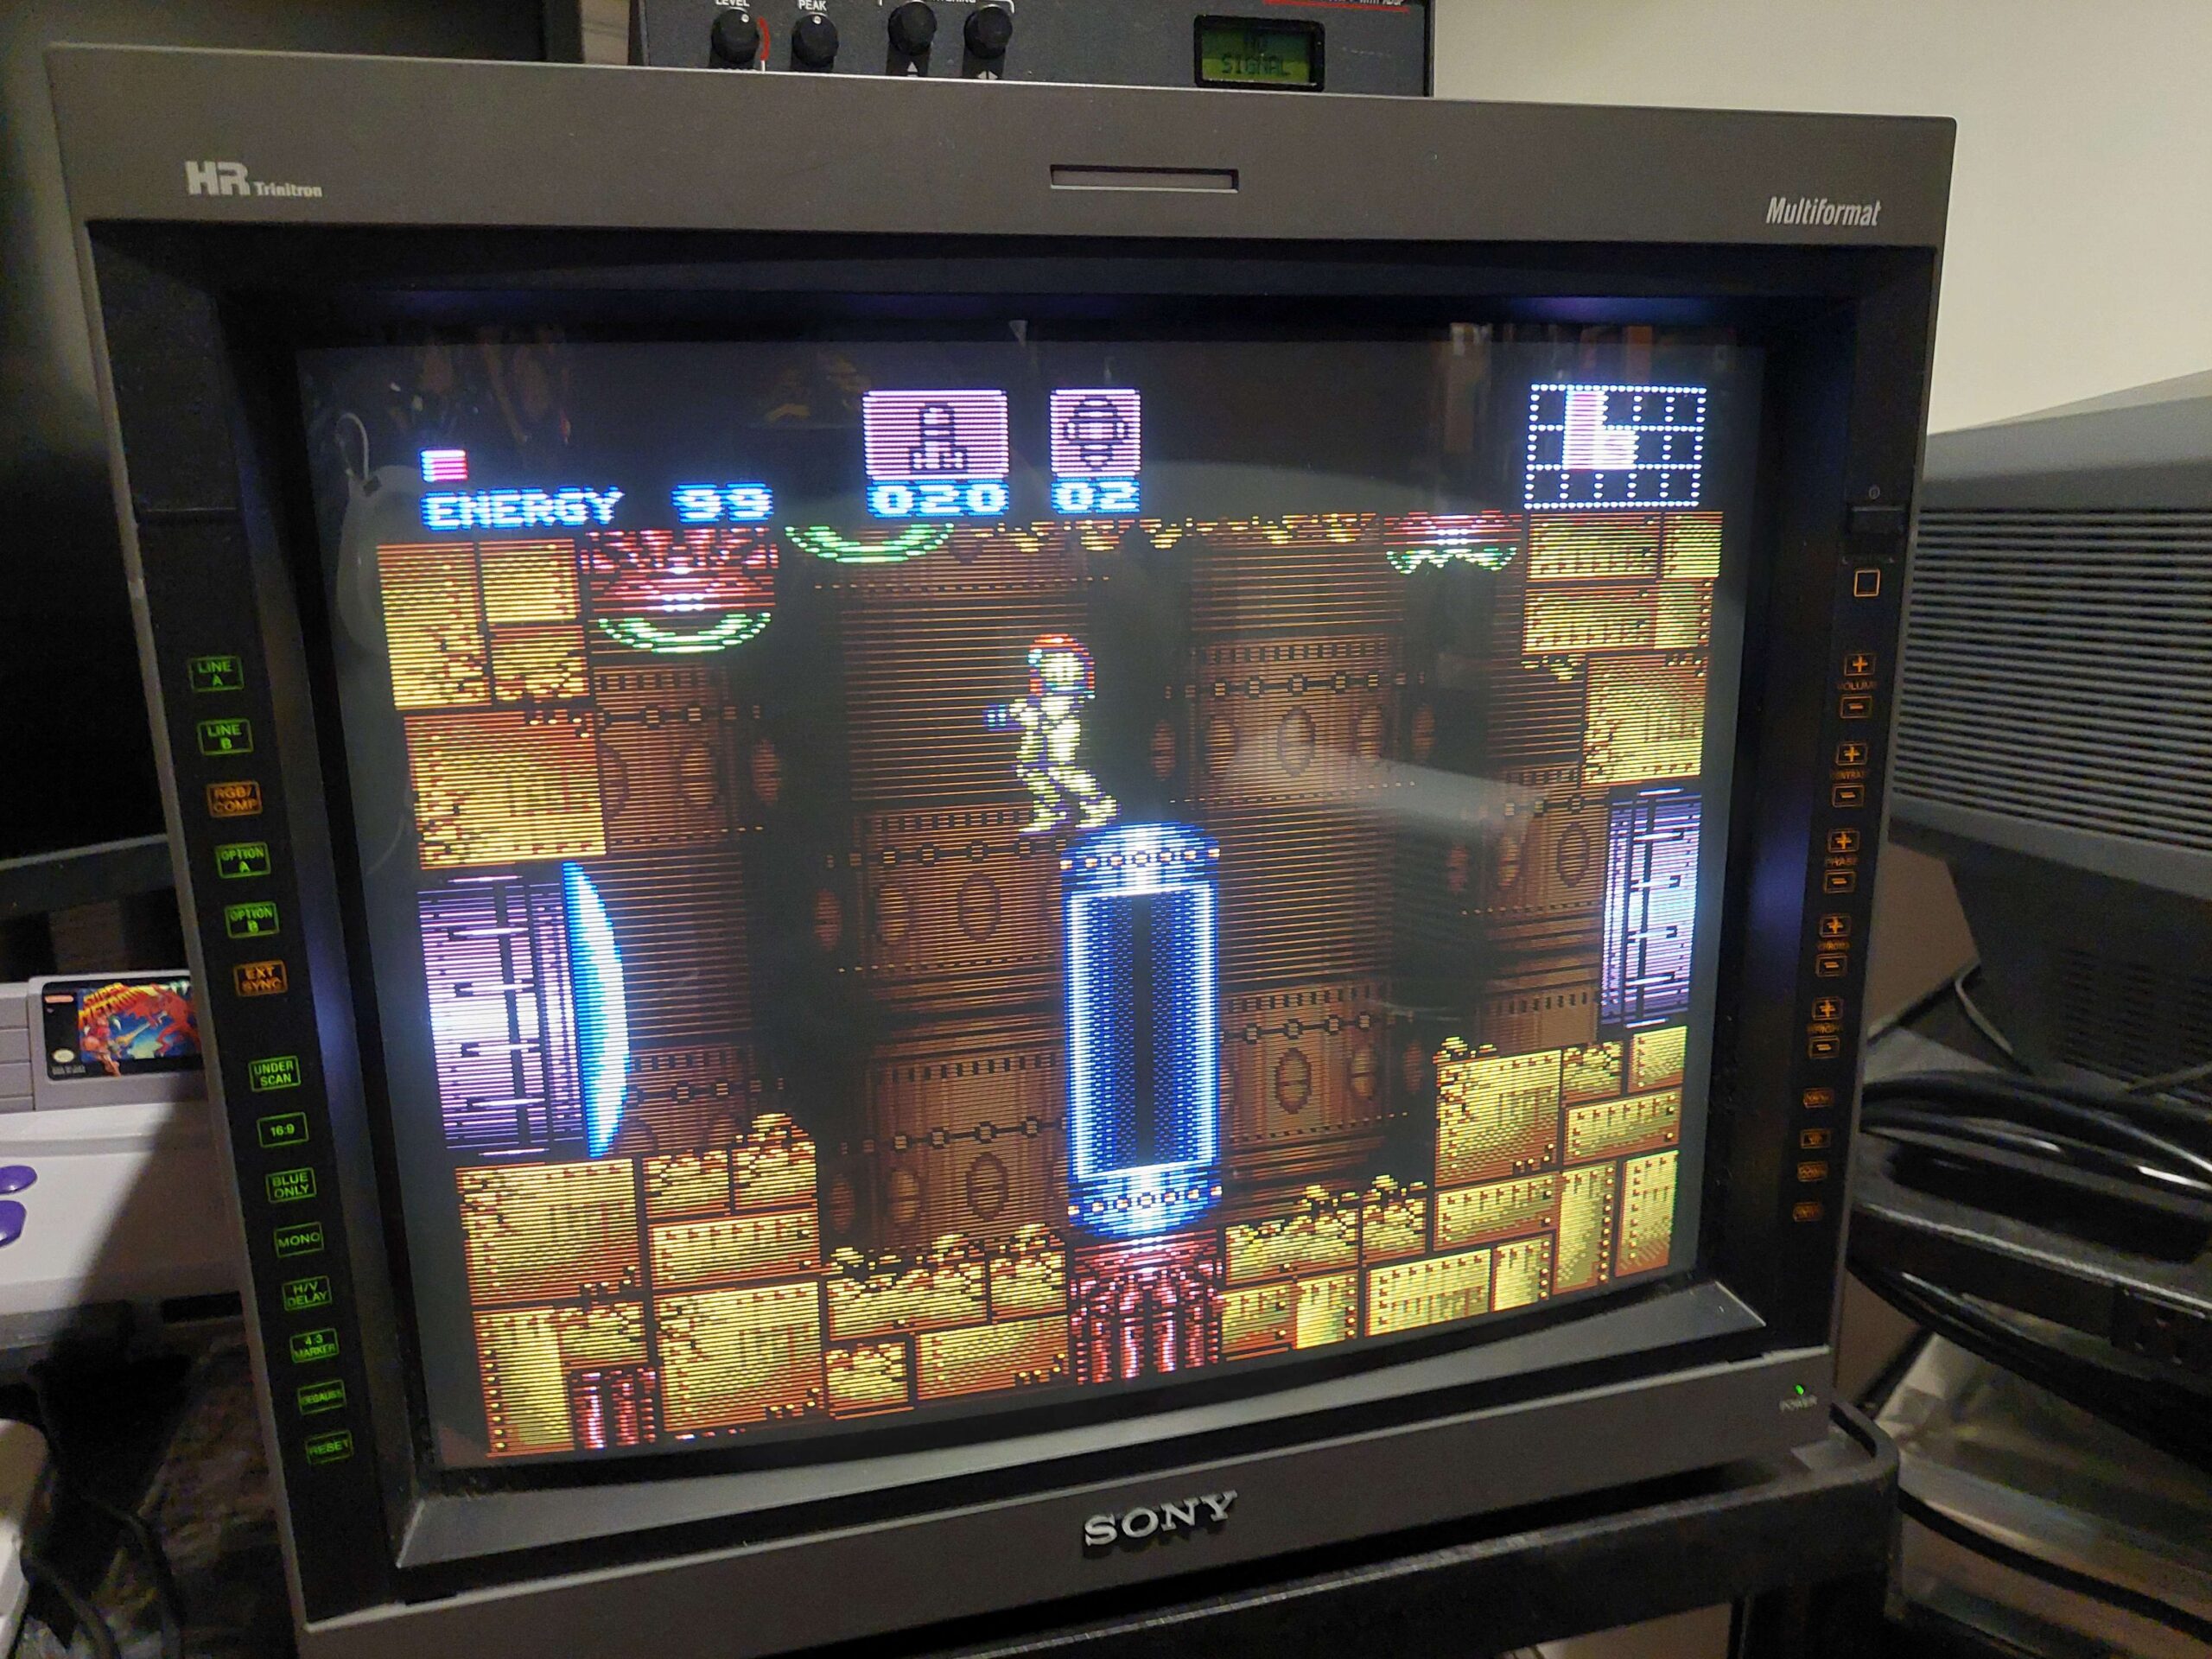 SUper Metroid is being played on a very fancy CRT television, using the modded SNES Jr